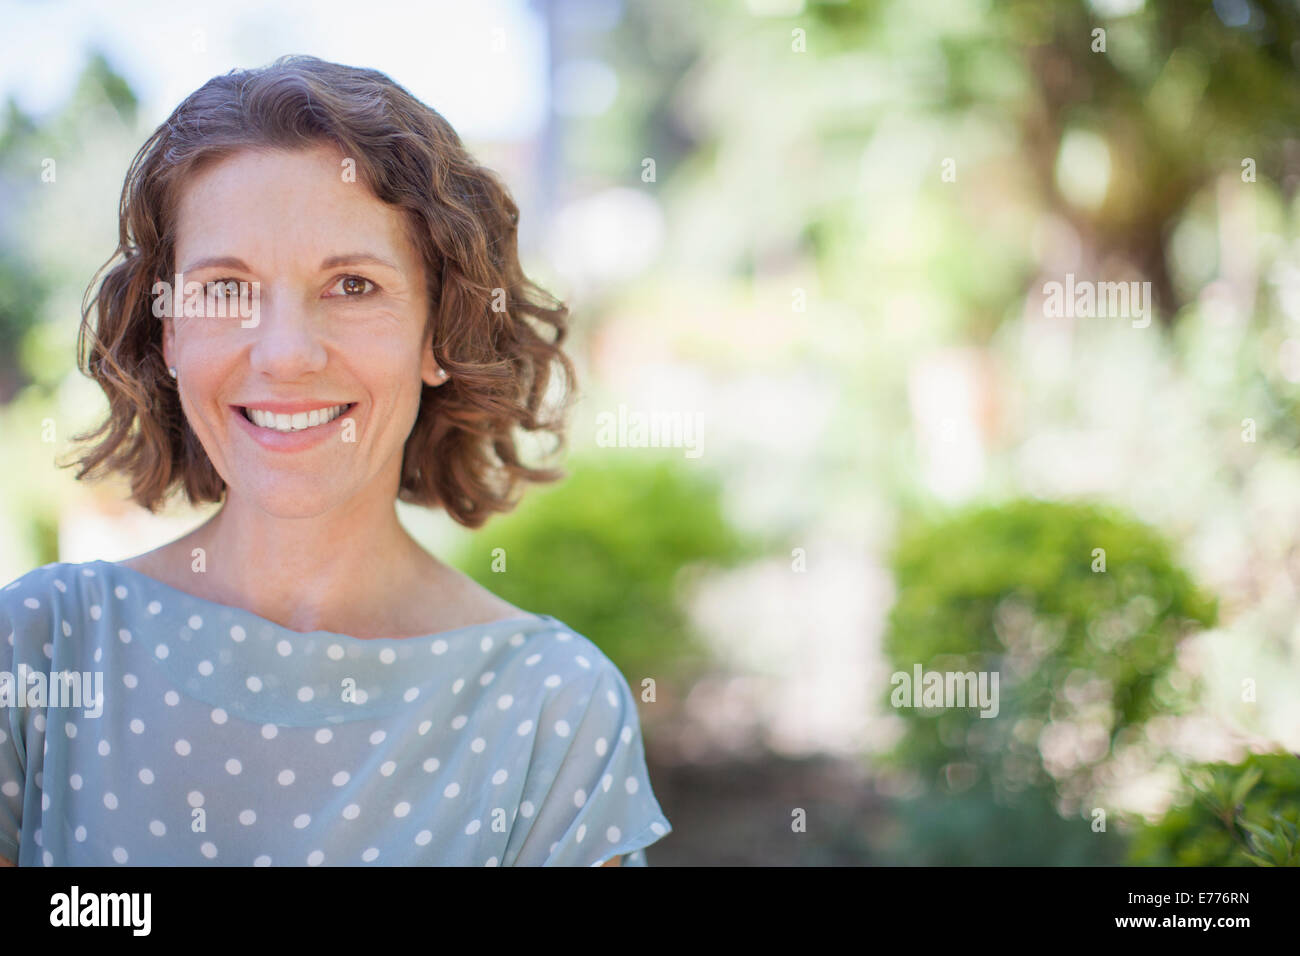 Older woman smiling outdoors Banque D'Images